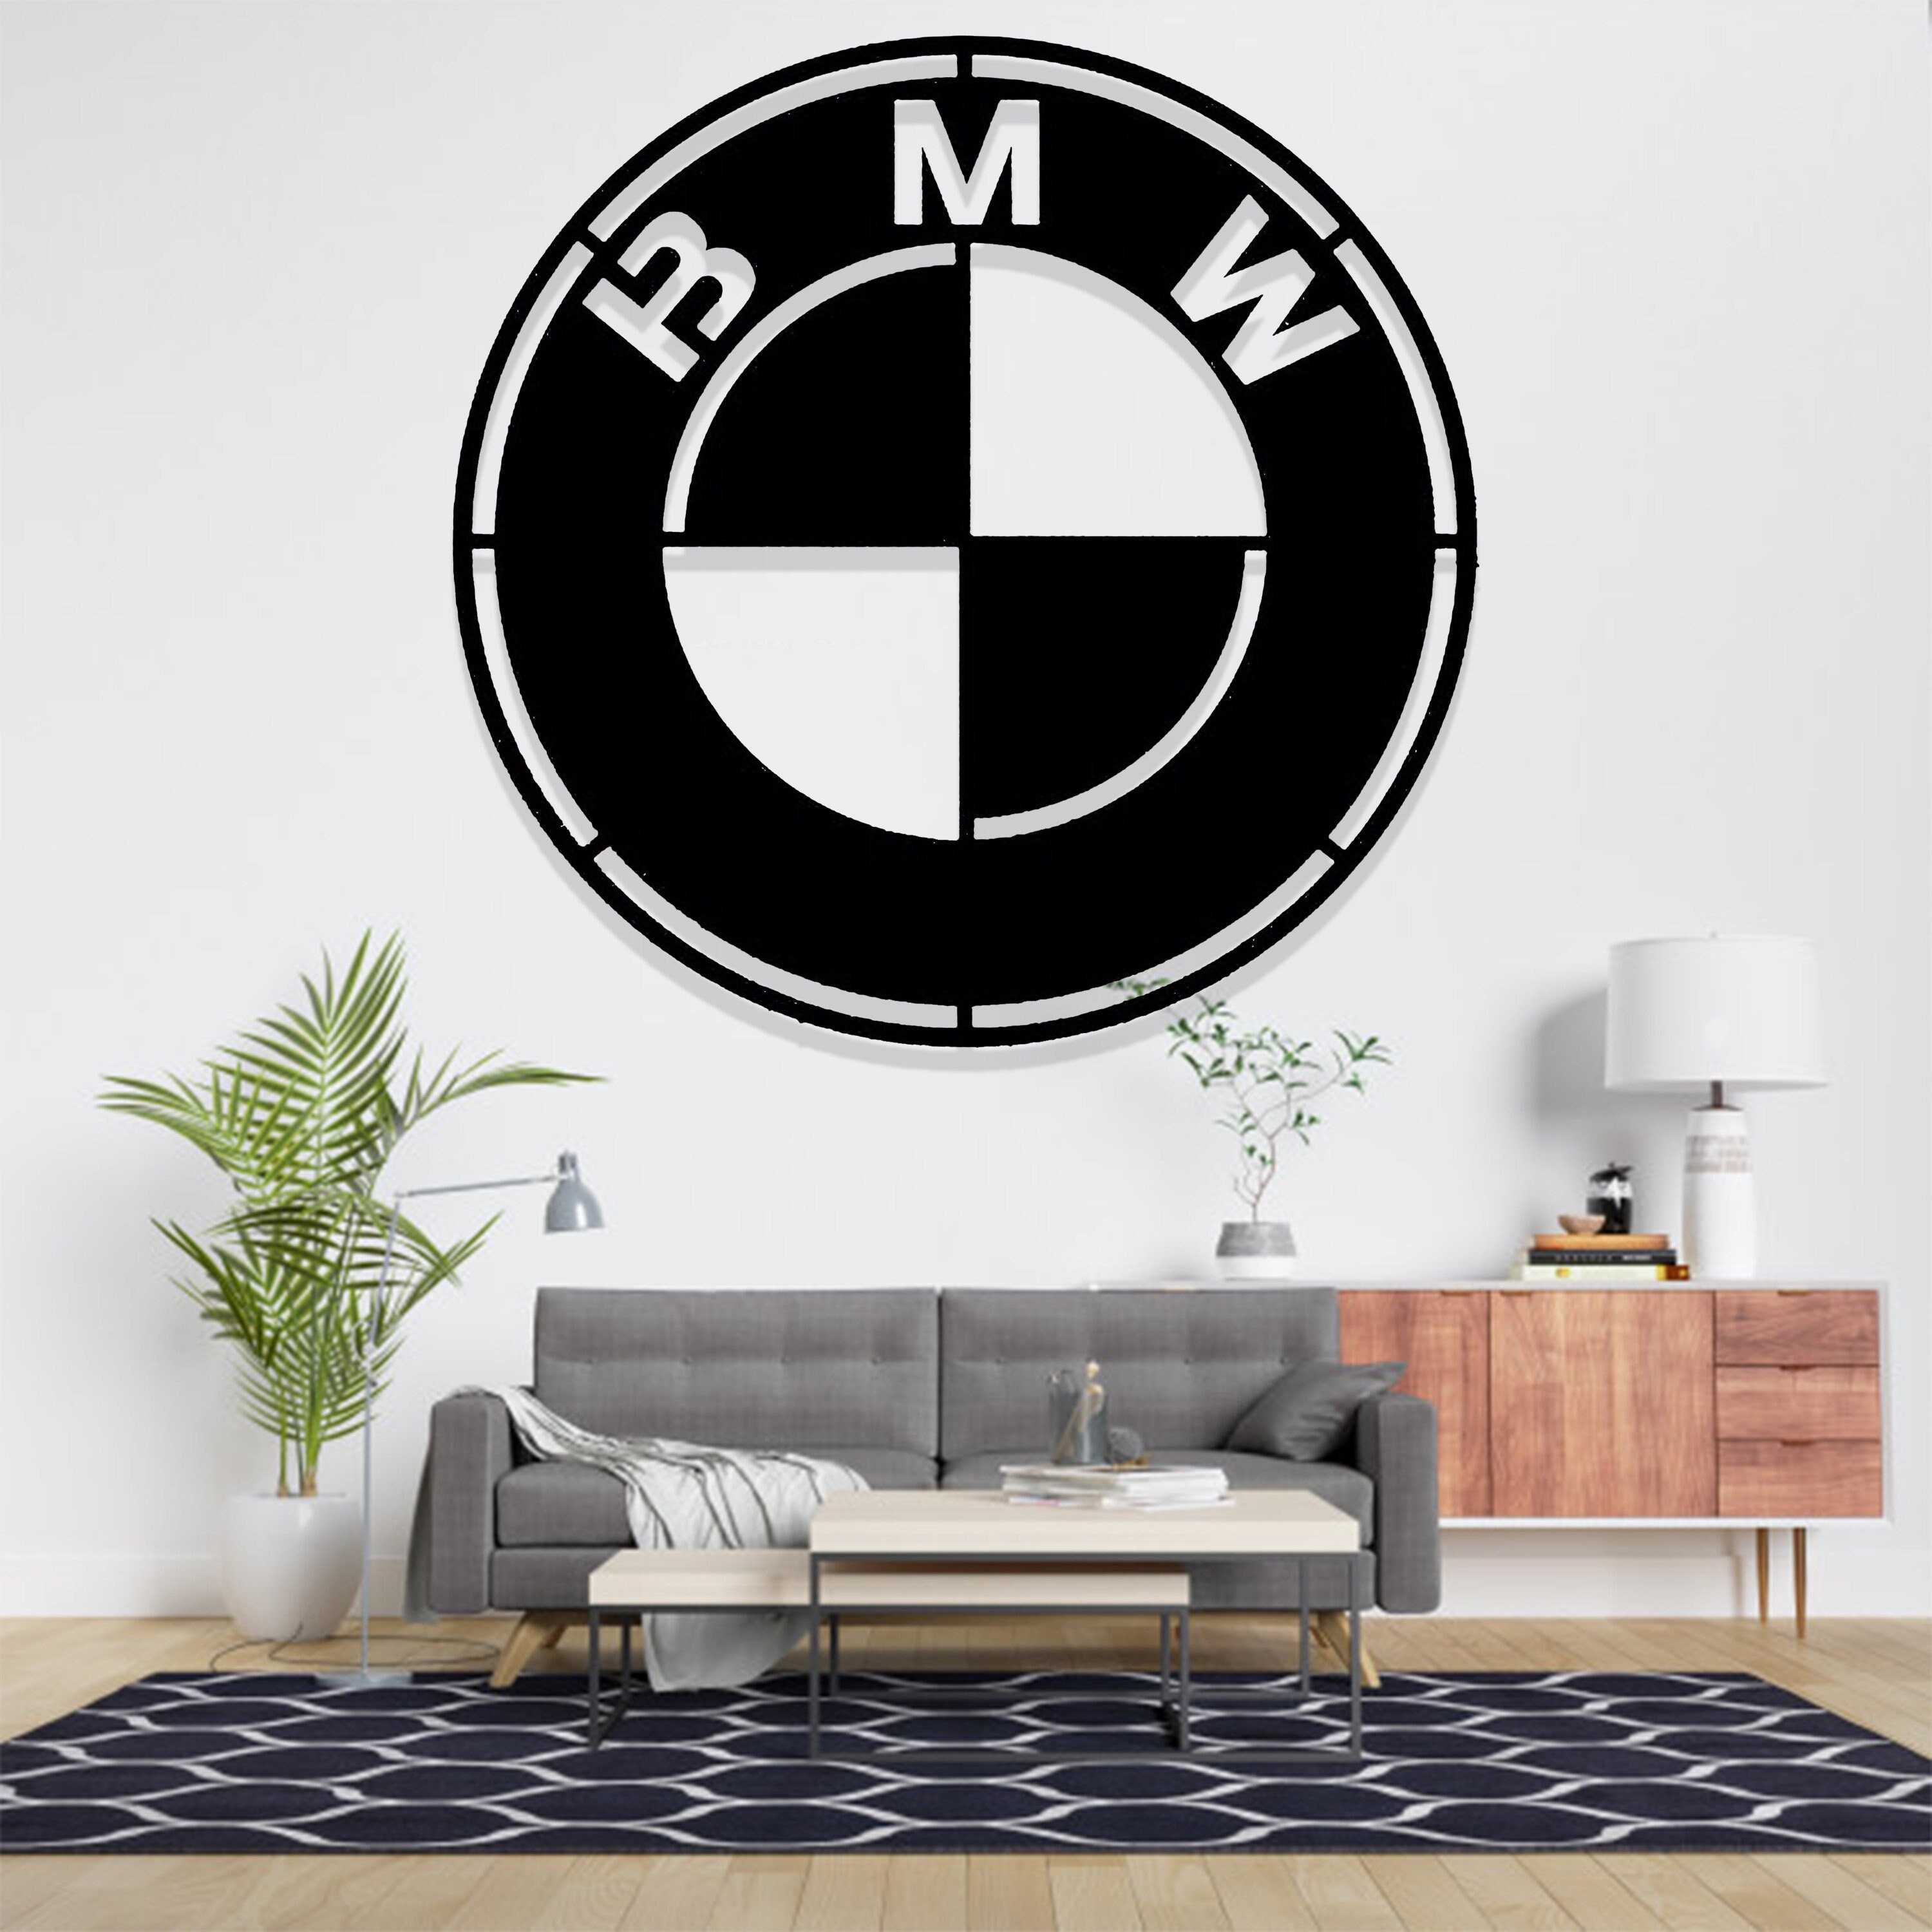 Bmw Wall Decal 